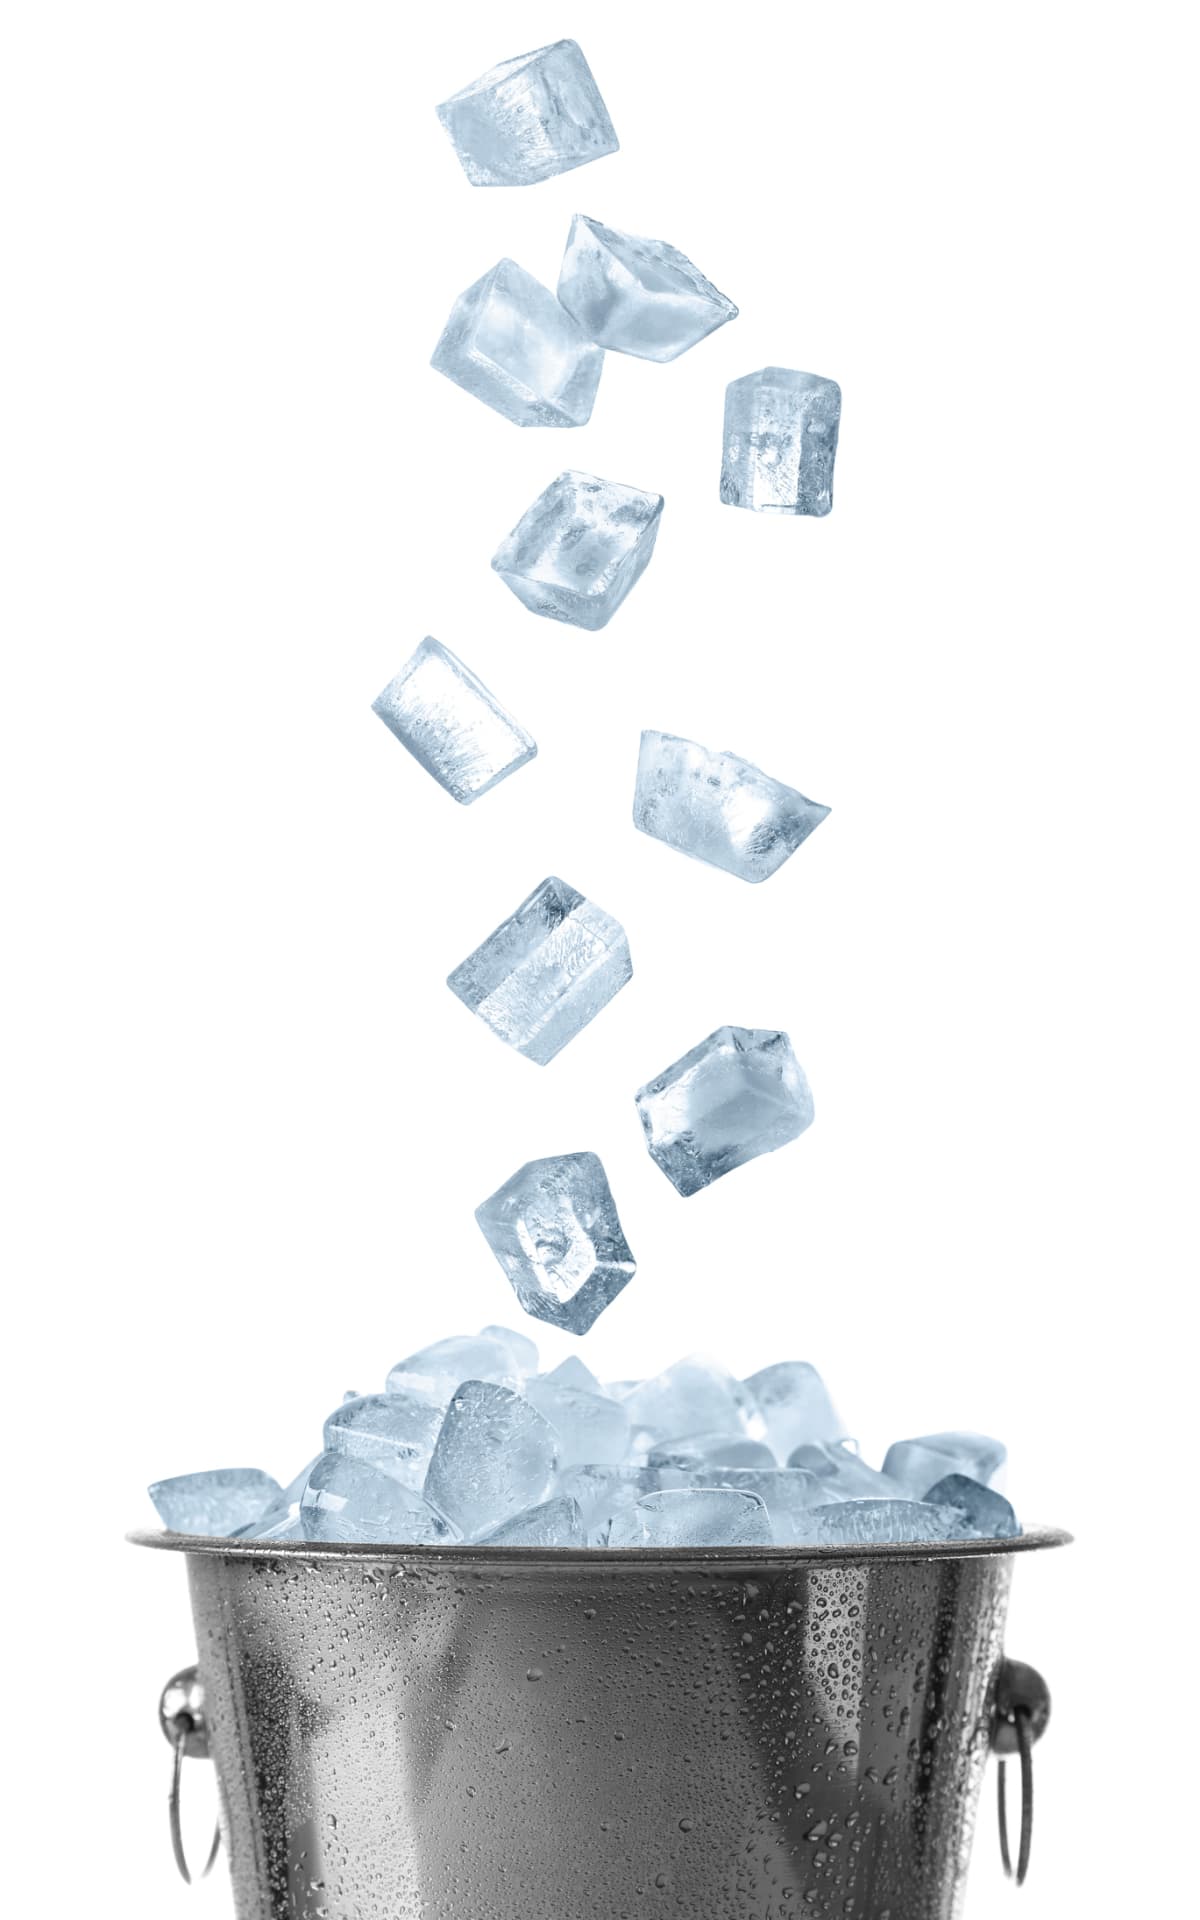 Ice cubes falling into bucket on white background